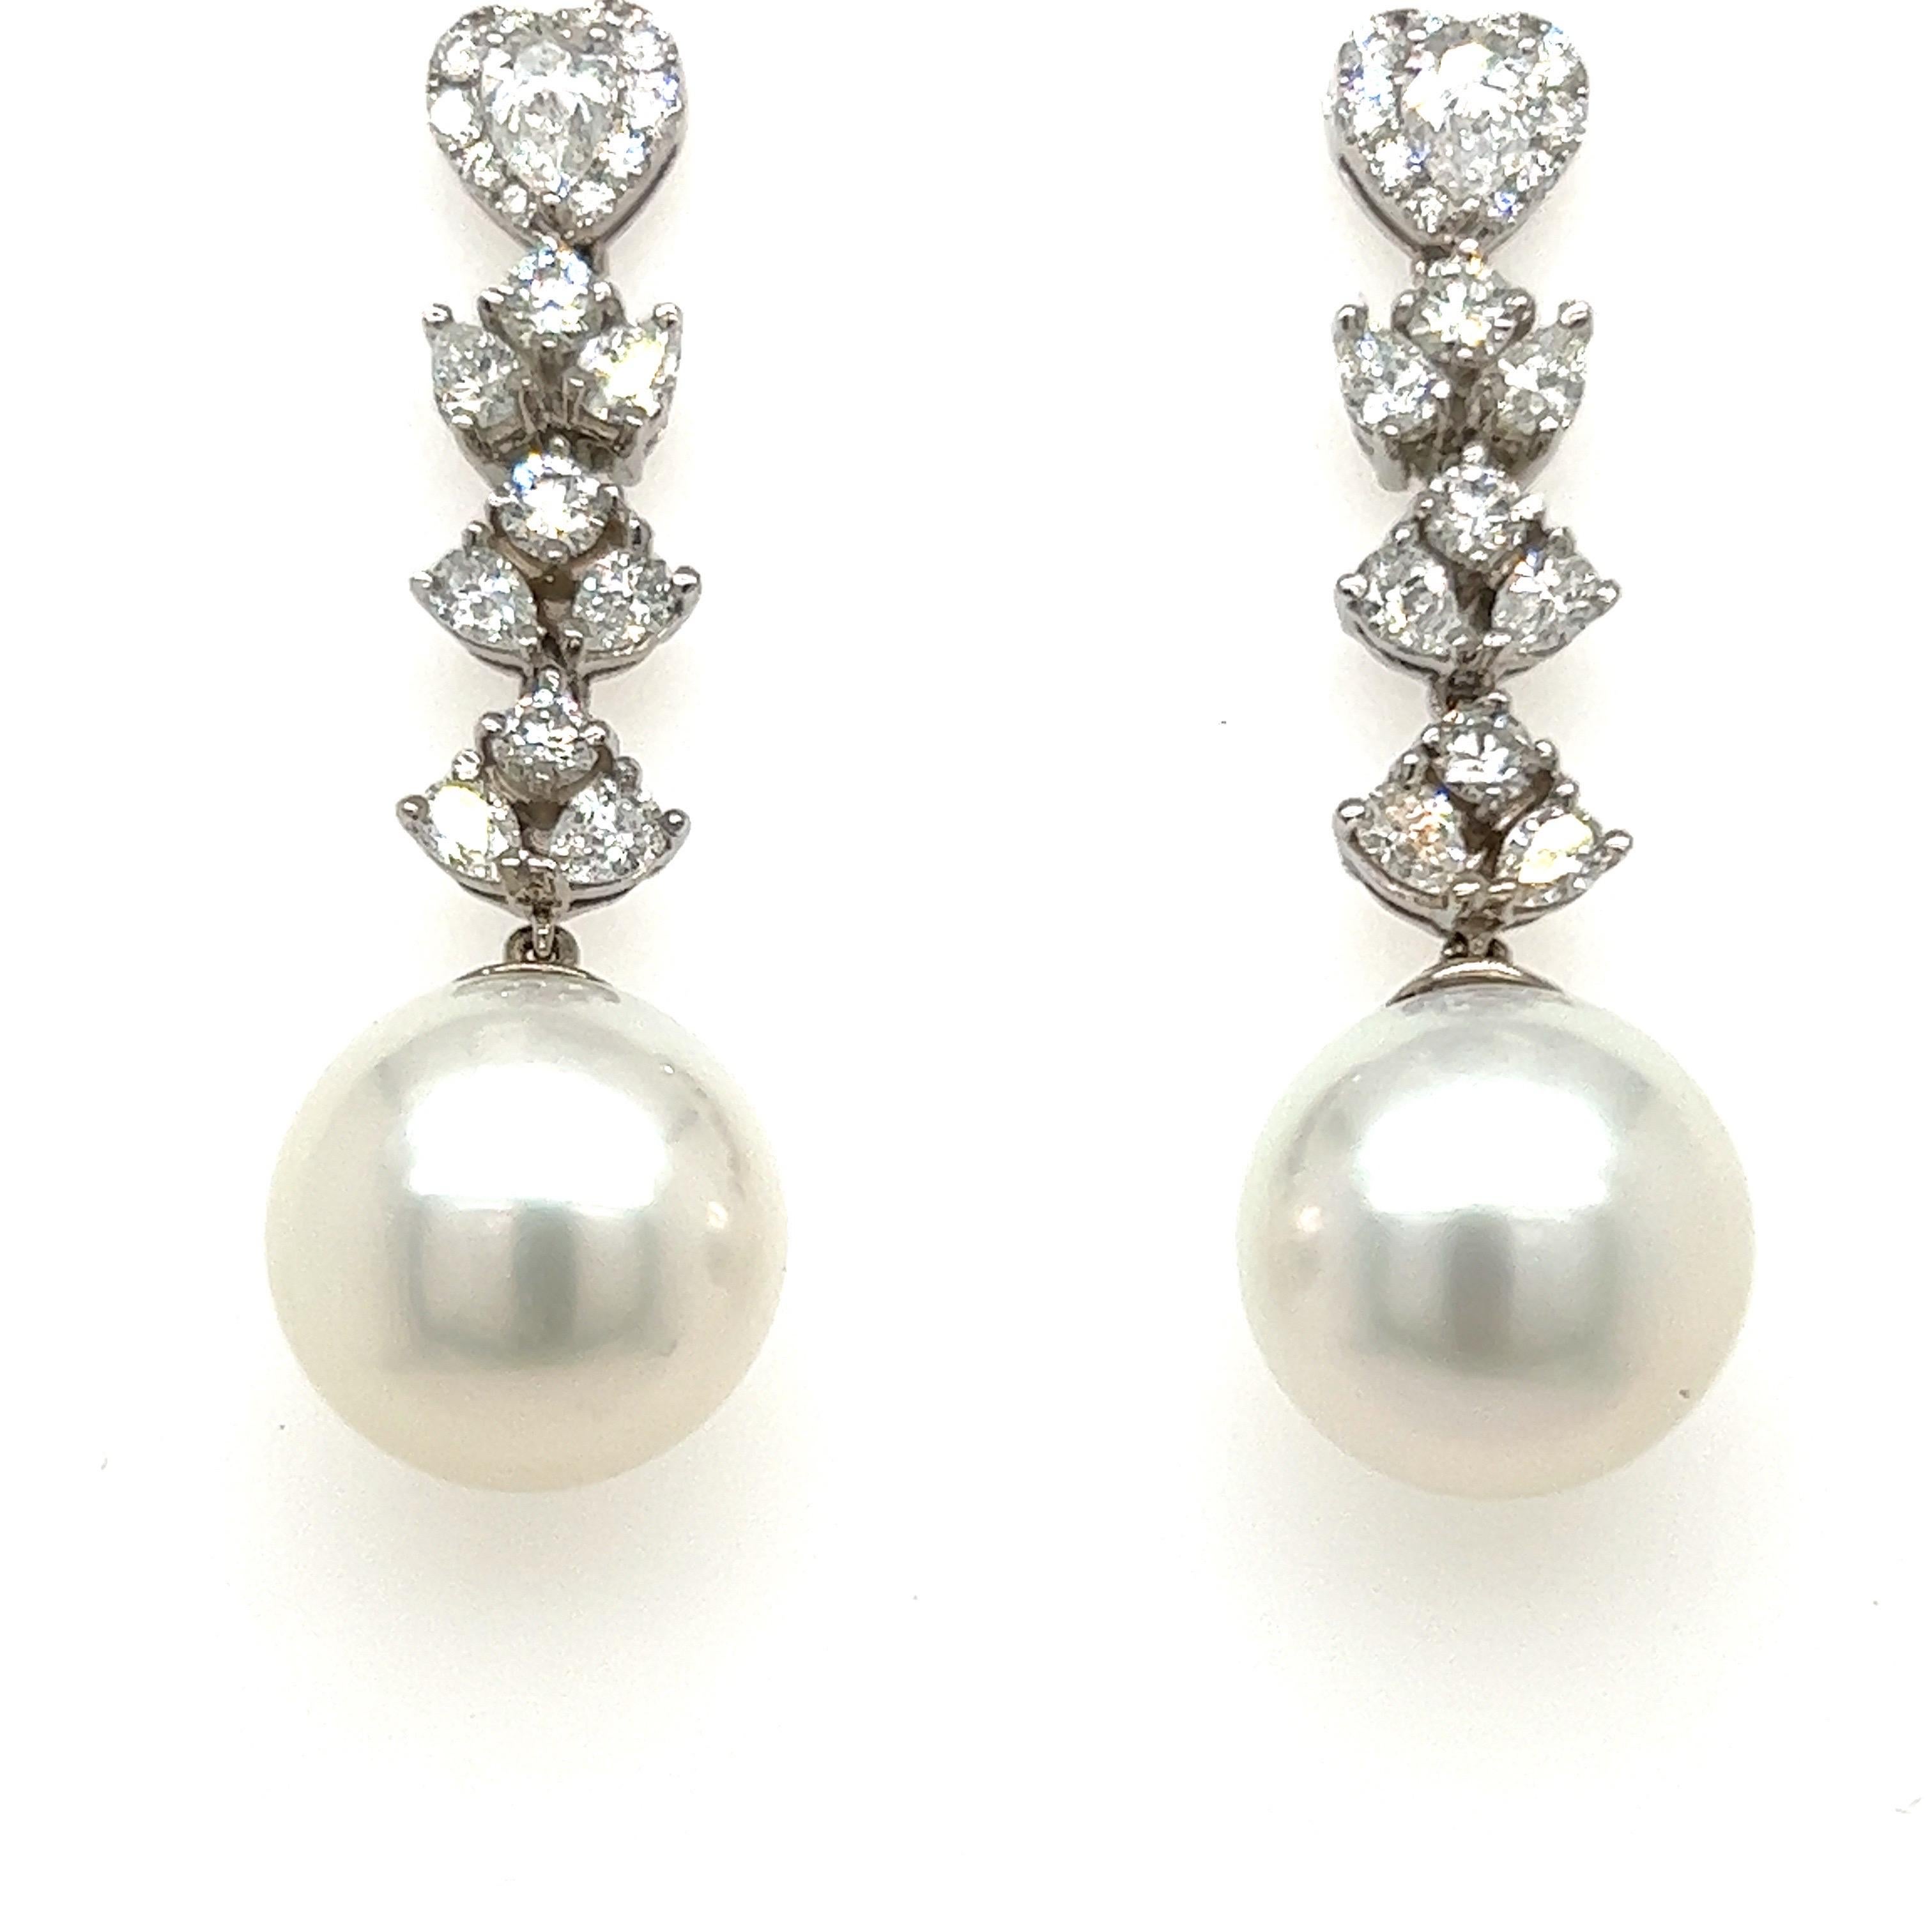 Glamorous South Sea Pearl earrings. High pearly luster,  
silver overtone, 13mm natural South Sea matching pearls, accented with pear shape and round  brilliant cut diamonds. Handcrafted design set in 18 karats white gold with post and butterfly